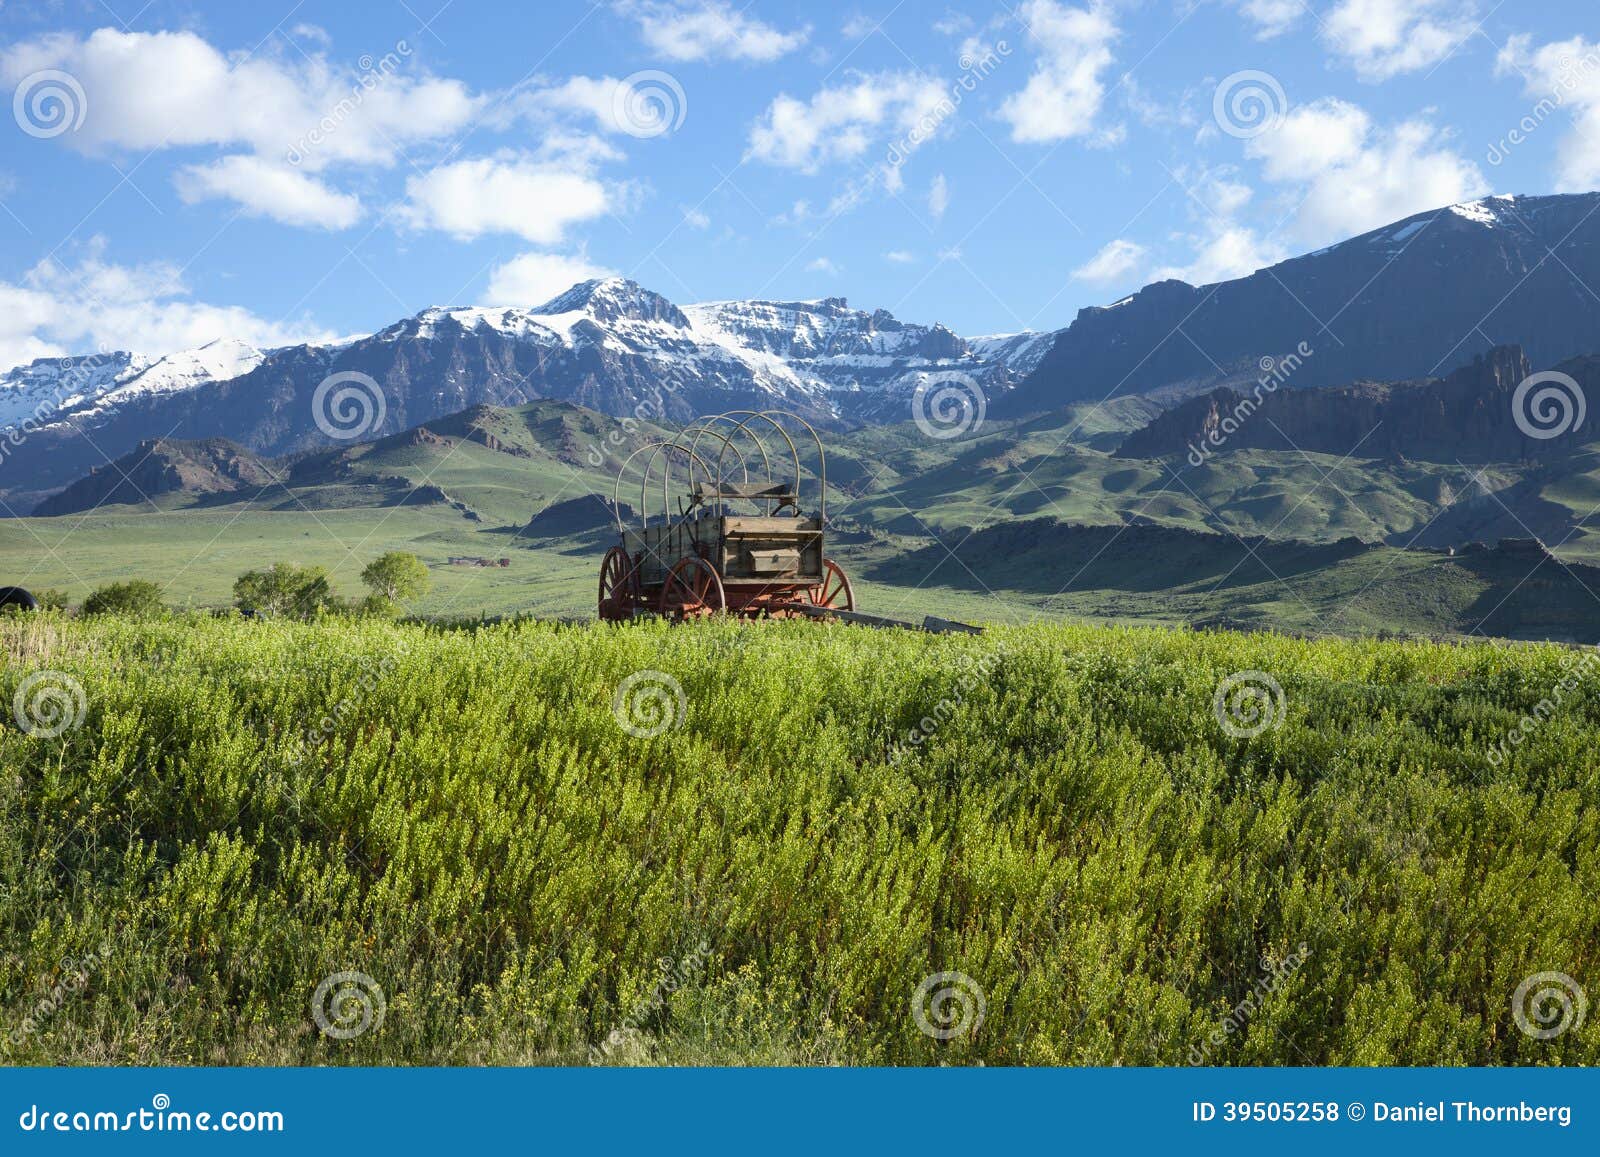 old covered wagon in the absaroka mountains of wyo